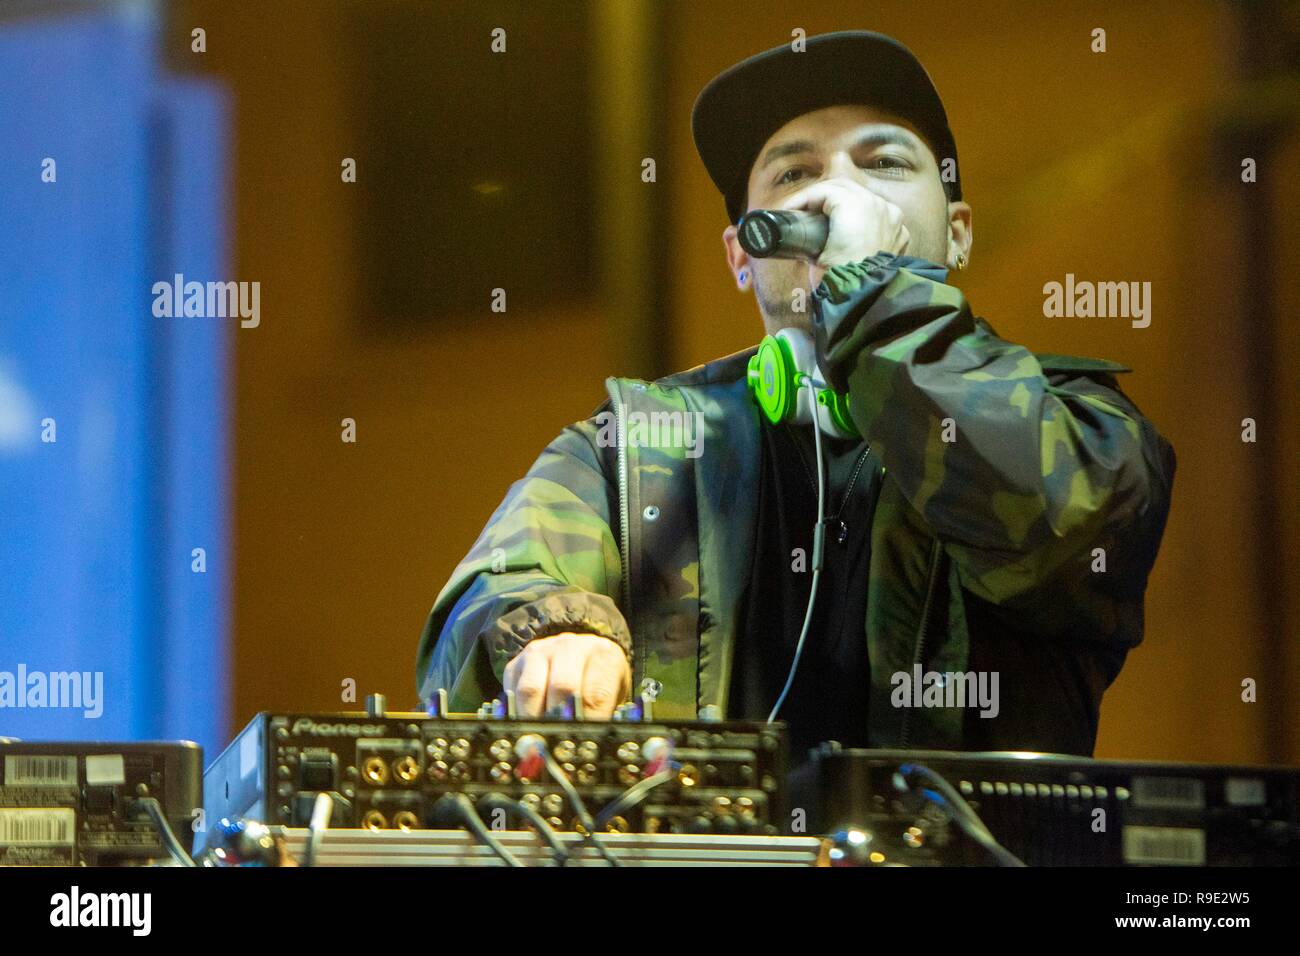 Manama, Bahrain. 21st Dec, 2018. DJ J Dayz performs during the Joint Chiefs USO Christmas Show for deployed service members at Naval Support Activity Bahrain December 22, 2018 in Manama, Bahrain. This year’s entertainers include actors Milo Ventimiglia, Wilmer Valderrama, DJ J Dayz, Fittest Man on Earth Matt Fraser, 3-time Olympic Gold Medalist Shaun White, Country Music Singer Kellie Pickler, and comedian Jessiemae Peluso. Credit: Planetpix/Alamy Live News Stock Photo